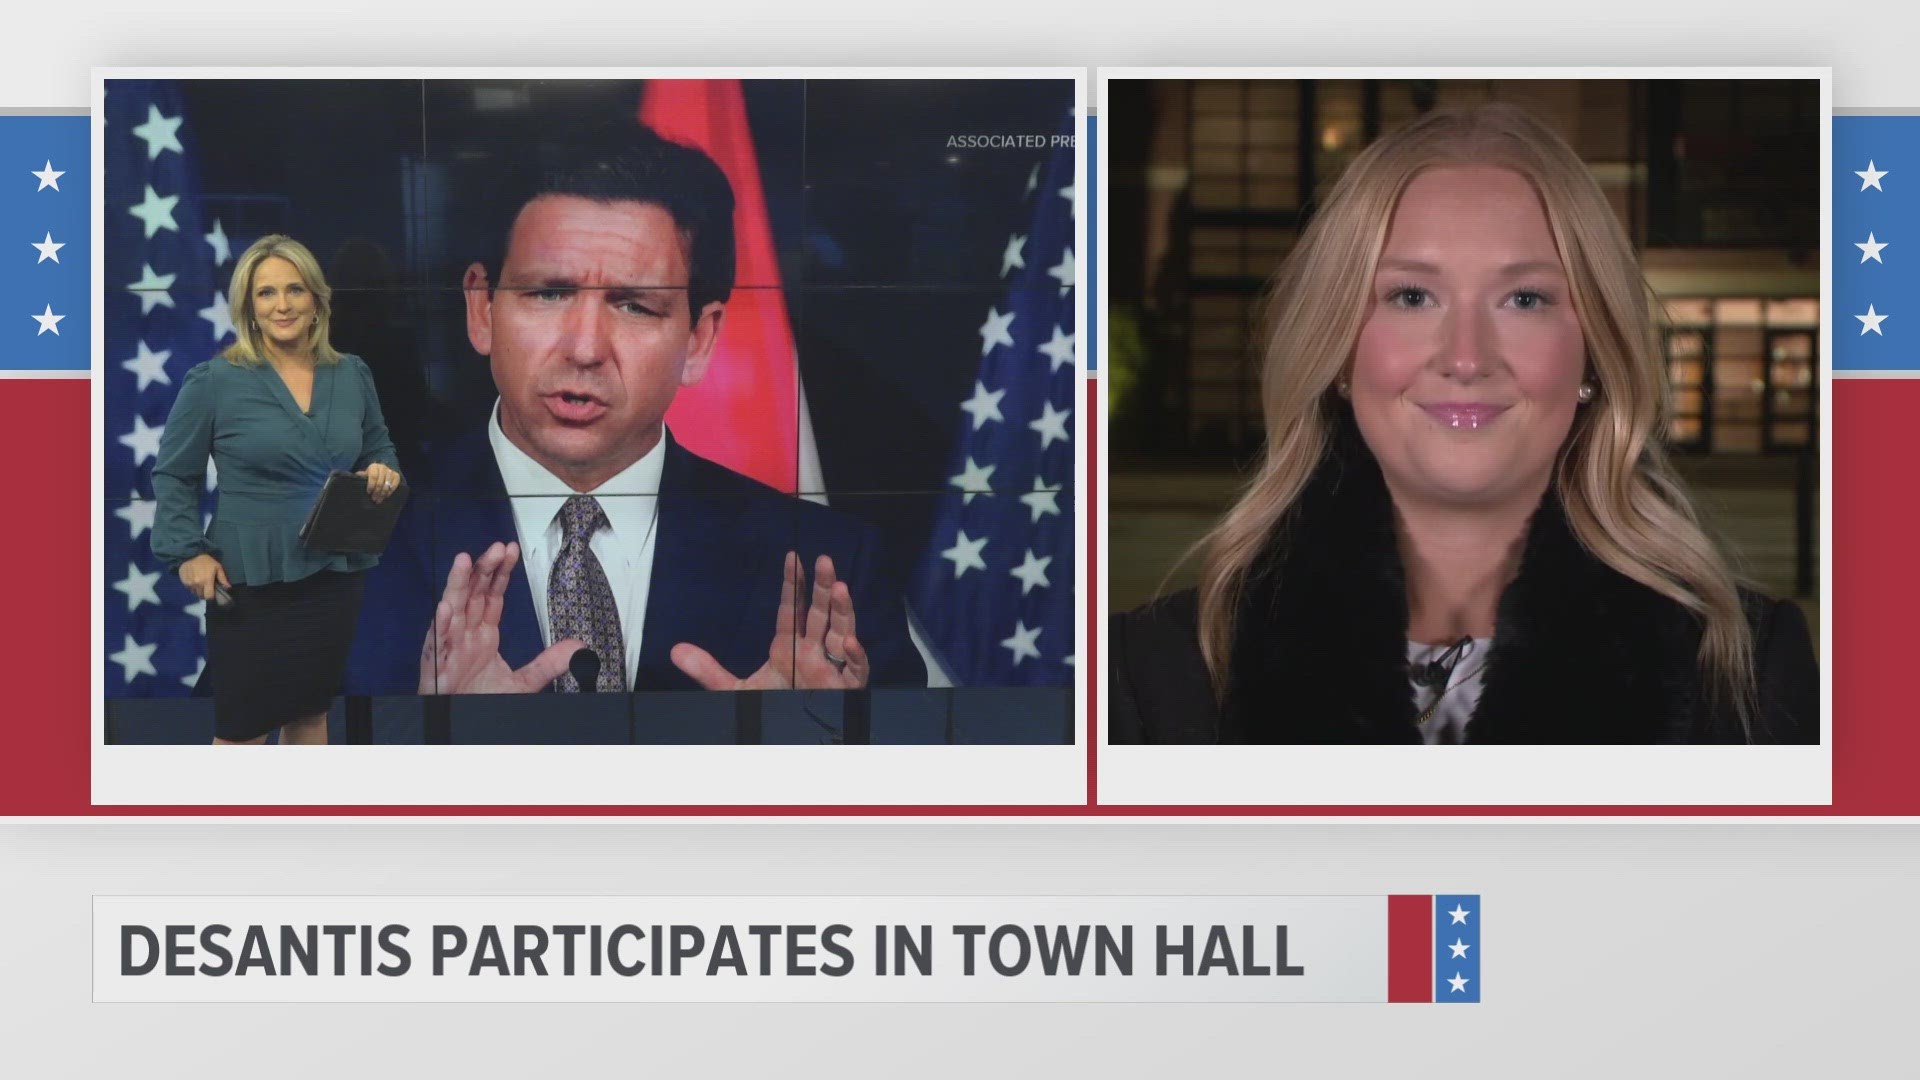 Local 5's Dana Searles was following along with the town hall, where DeSantis answered questions related to foreign affairs, the border, abortion and health care.